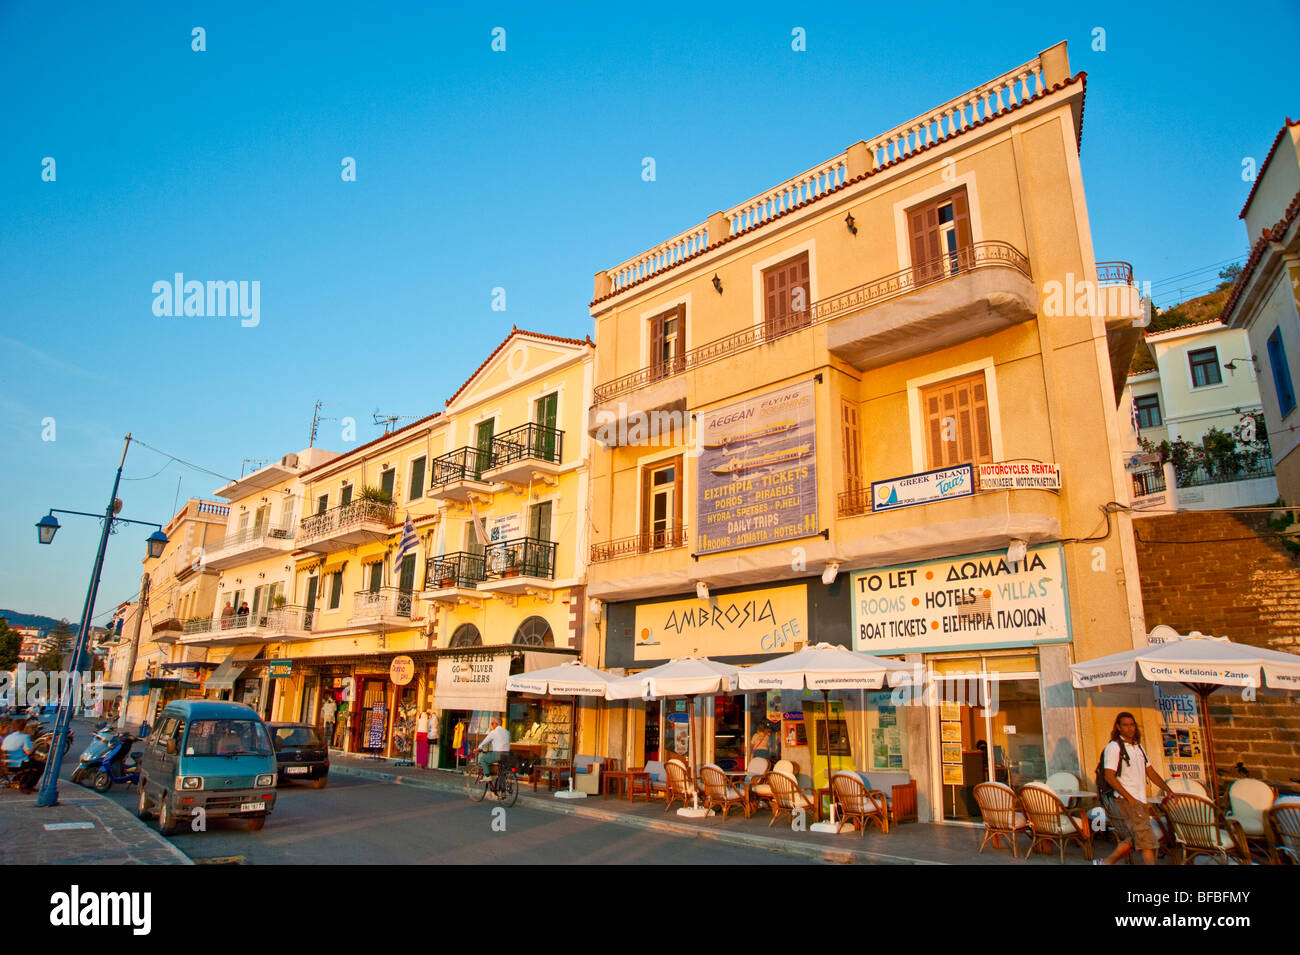 Bars and restaurants along main street at old town of Poros, Greece Stock Photo